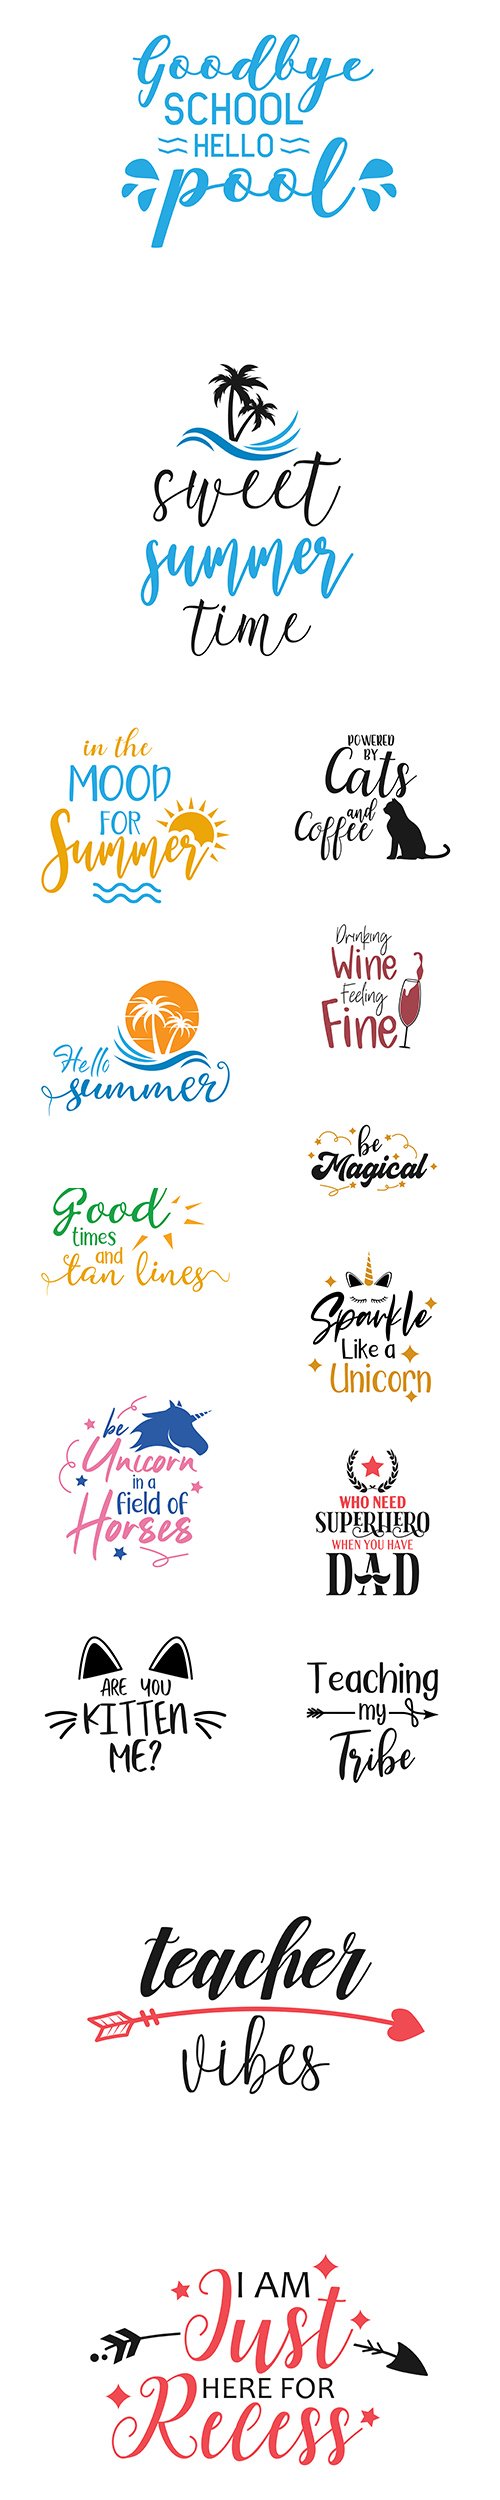 School, Summer, Unicorn and other Quote Lettering Typography Set